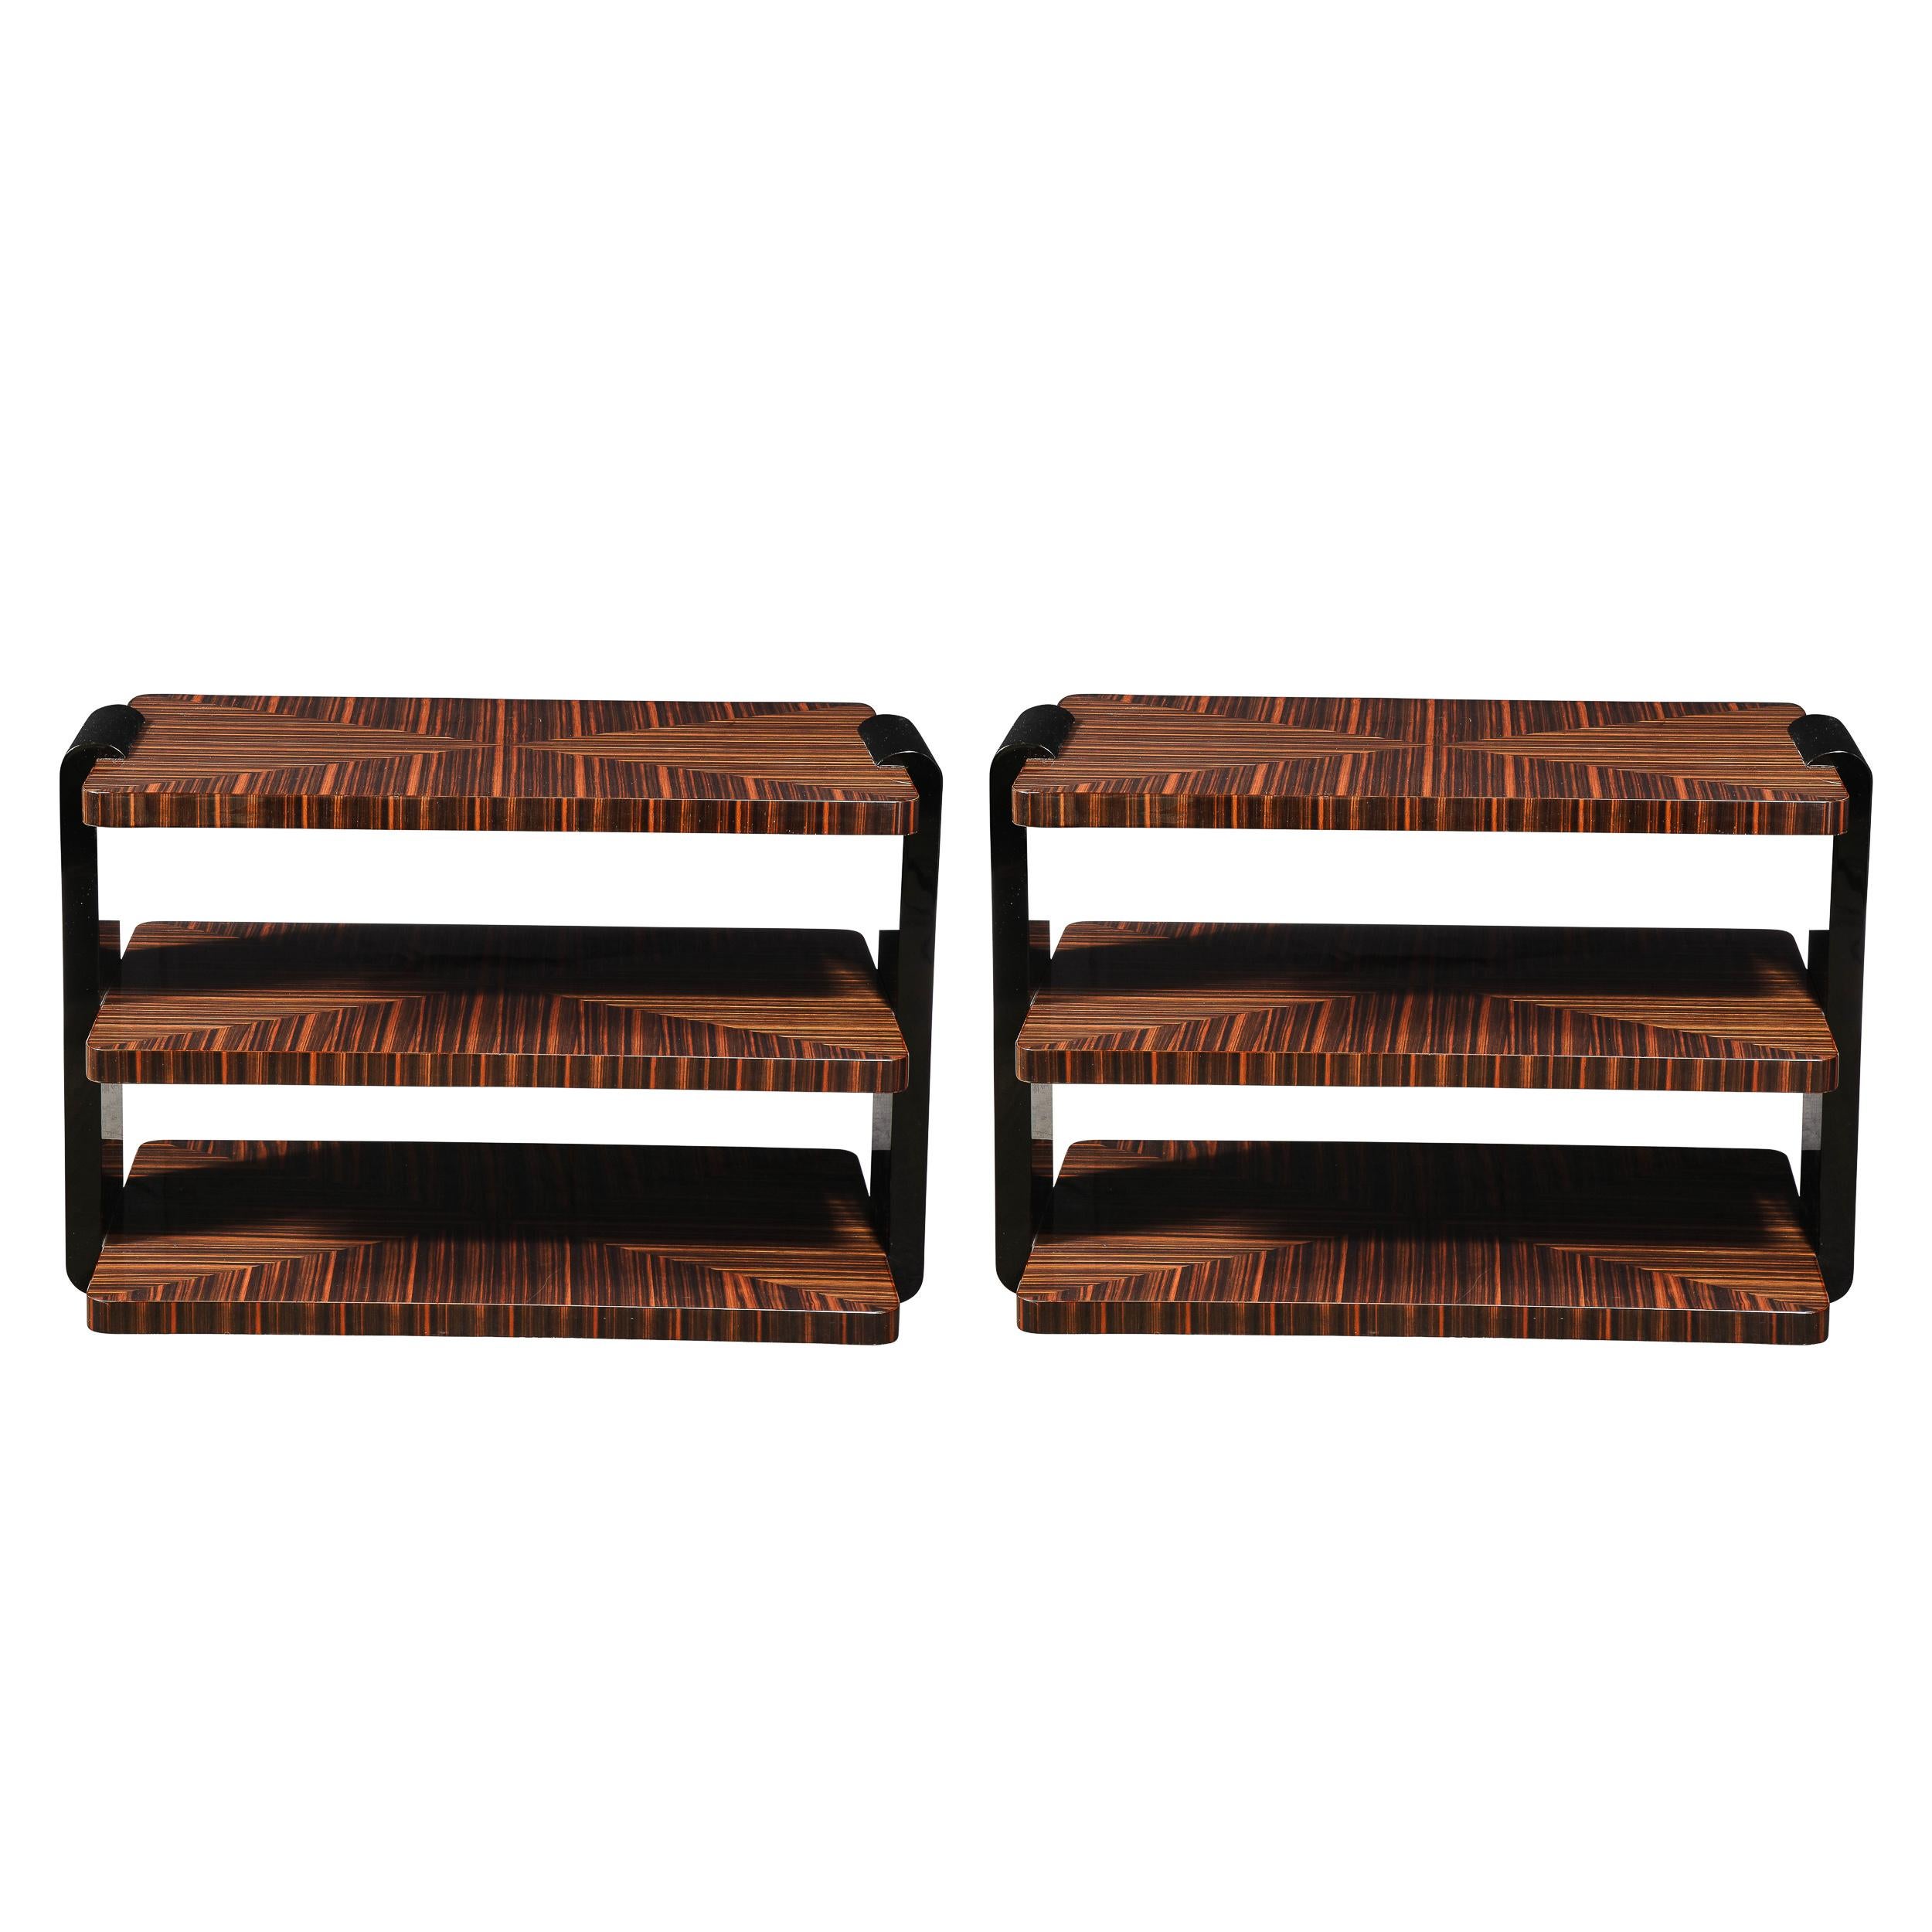 This stunning pair of Art Deco three tier occasional tables were realized in France circa 1930. They feature three rectangular table tops with rounded corners in beautiful bookmatched Macassar attached by two streamlined black lacquer supports